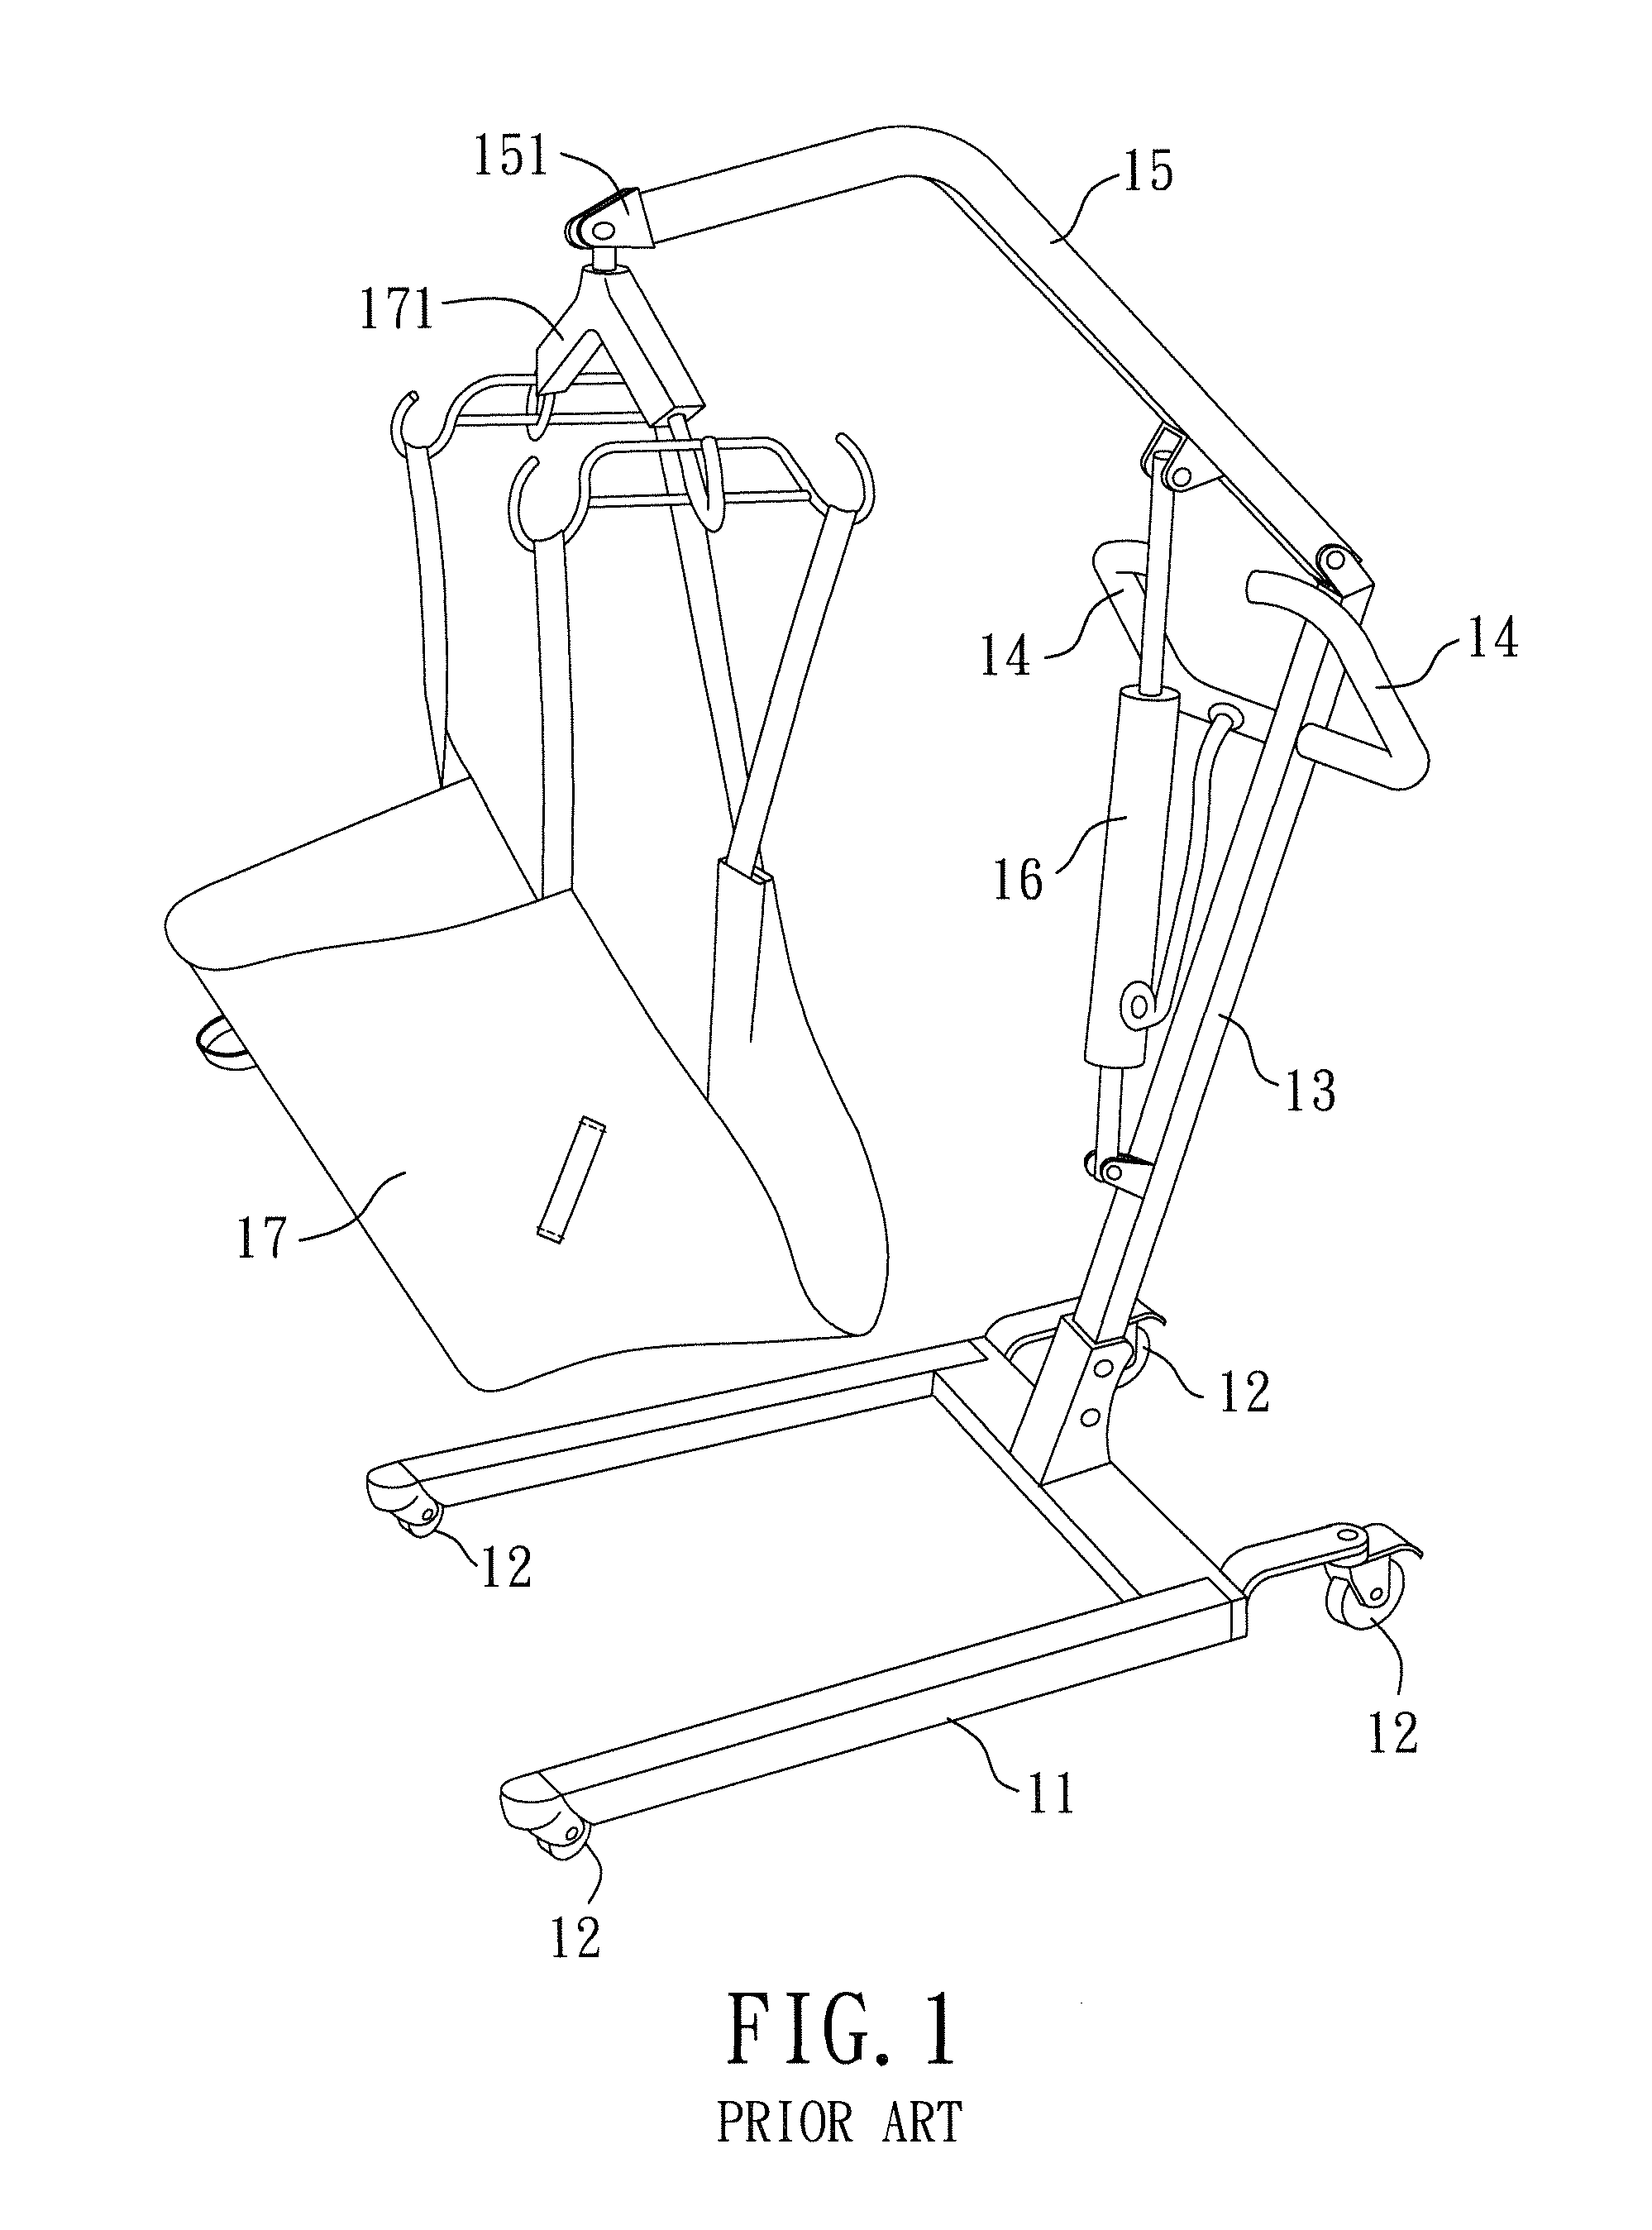 Patient lift and transfer device